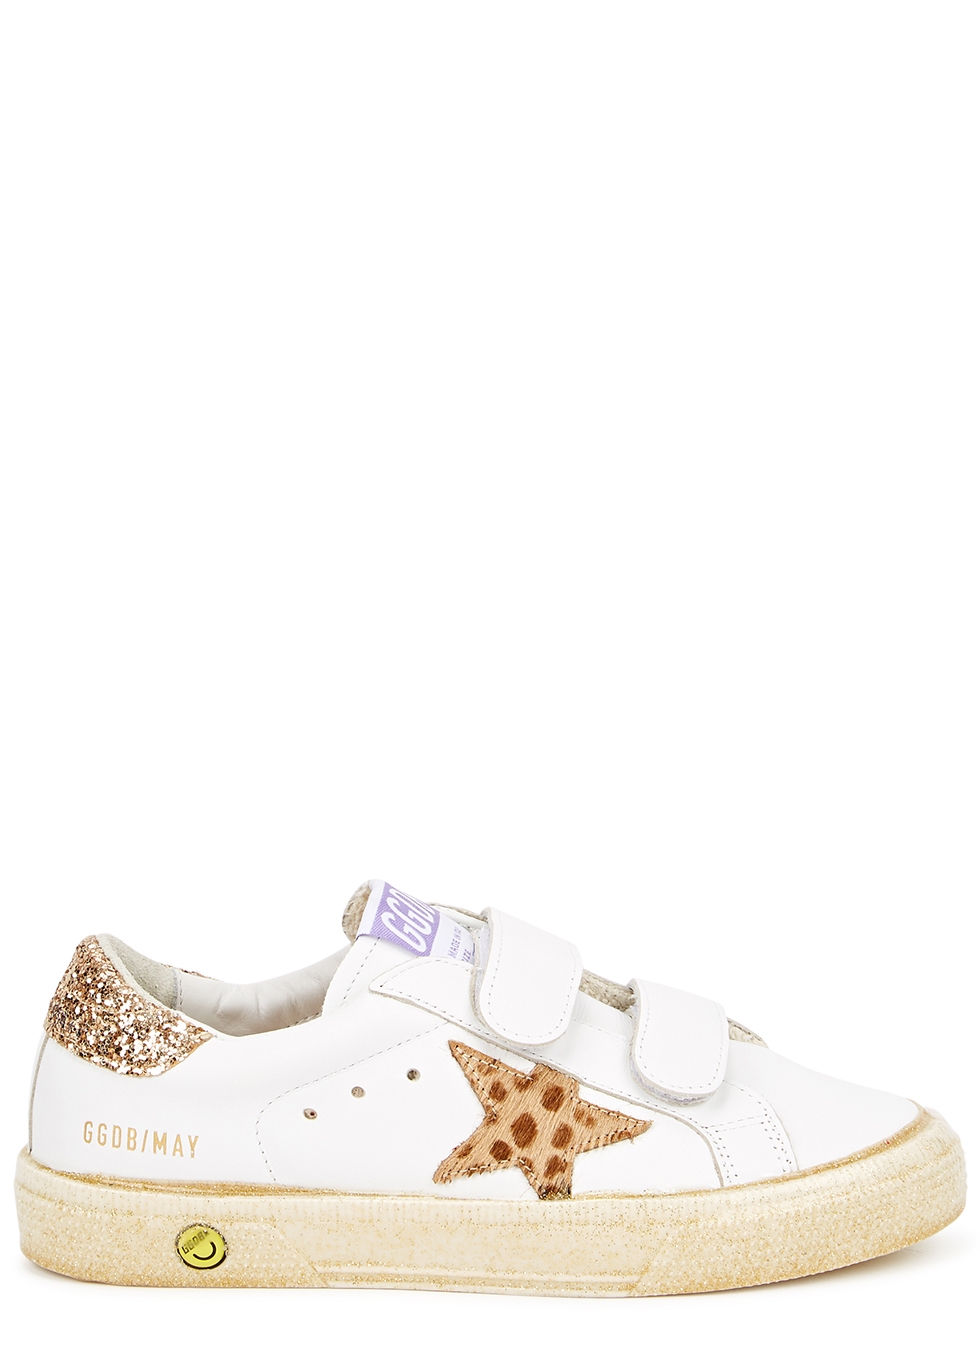 Harvey Nichols Shoes Flat Shoes School Shoes IT28-IT35 KIDS May School white leather sneakers 